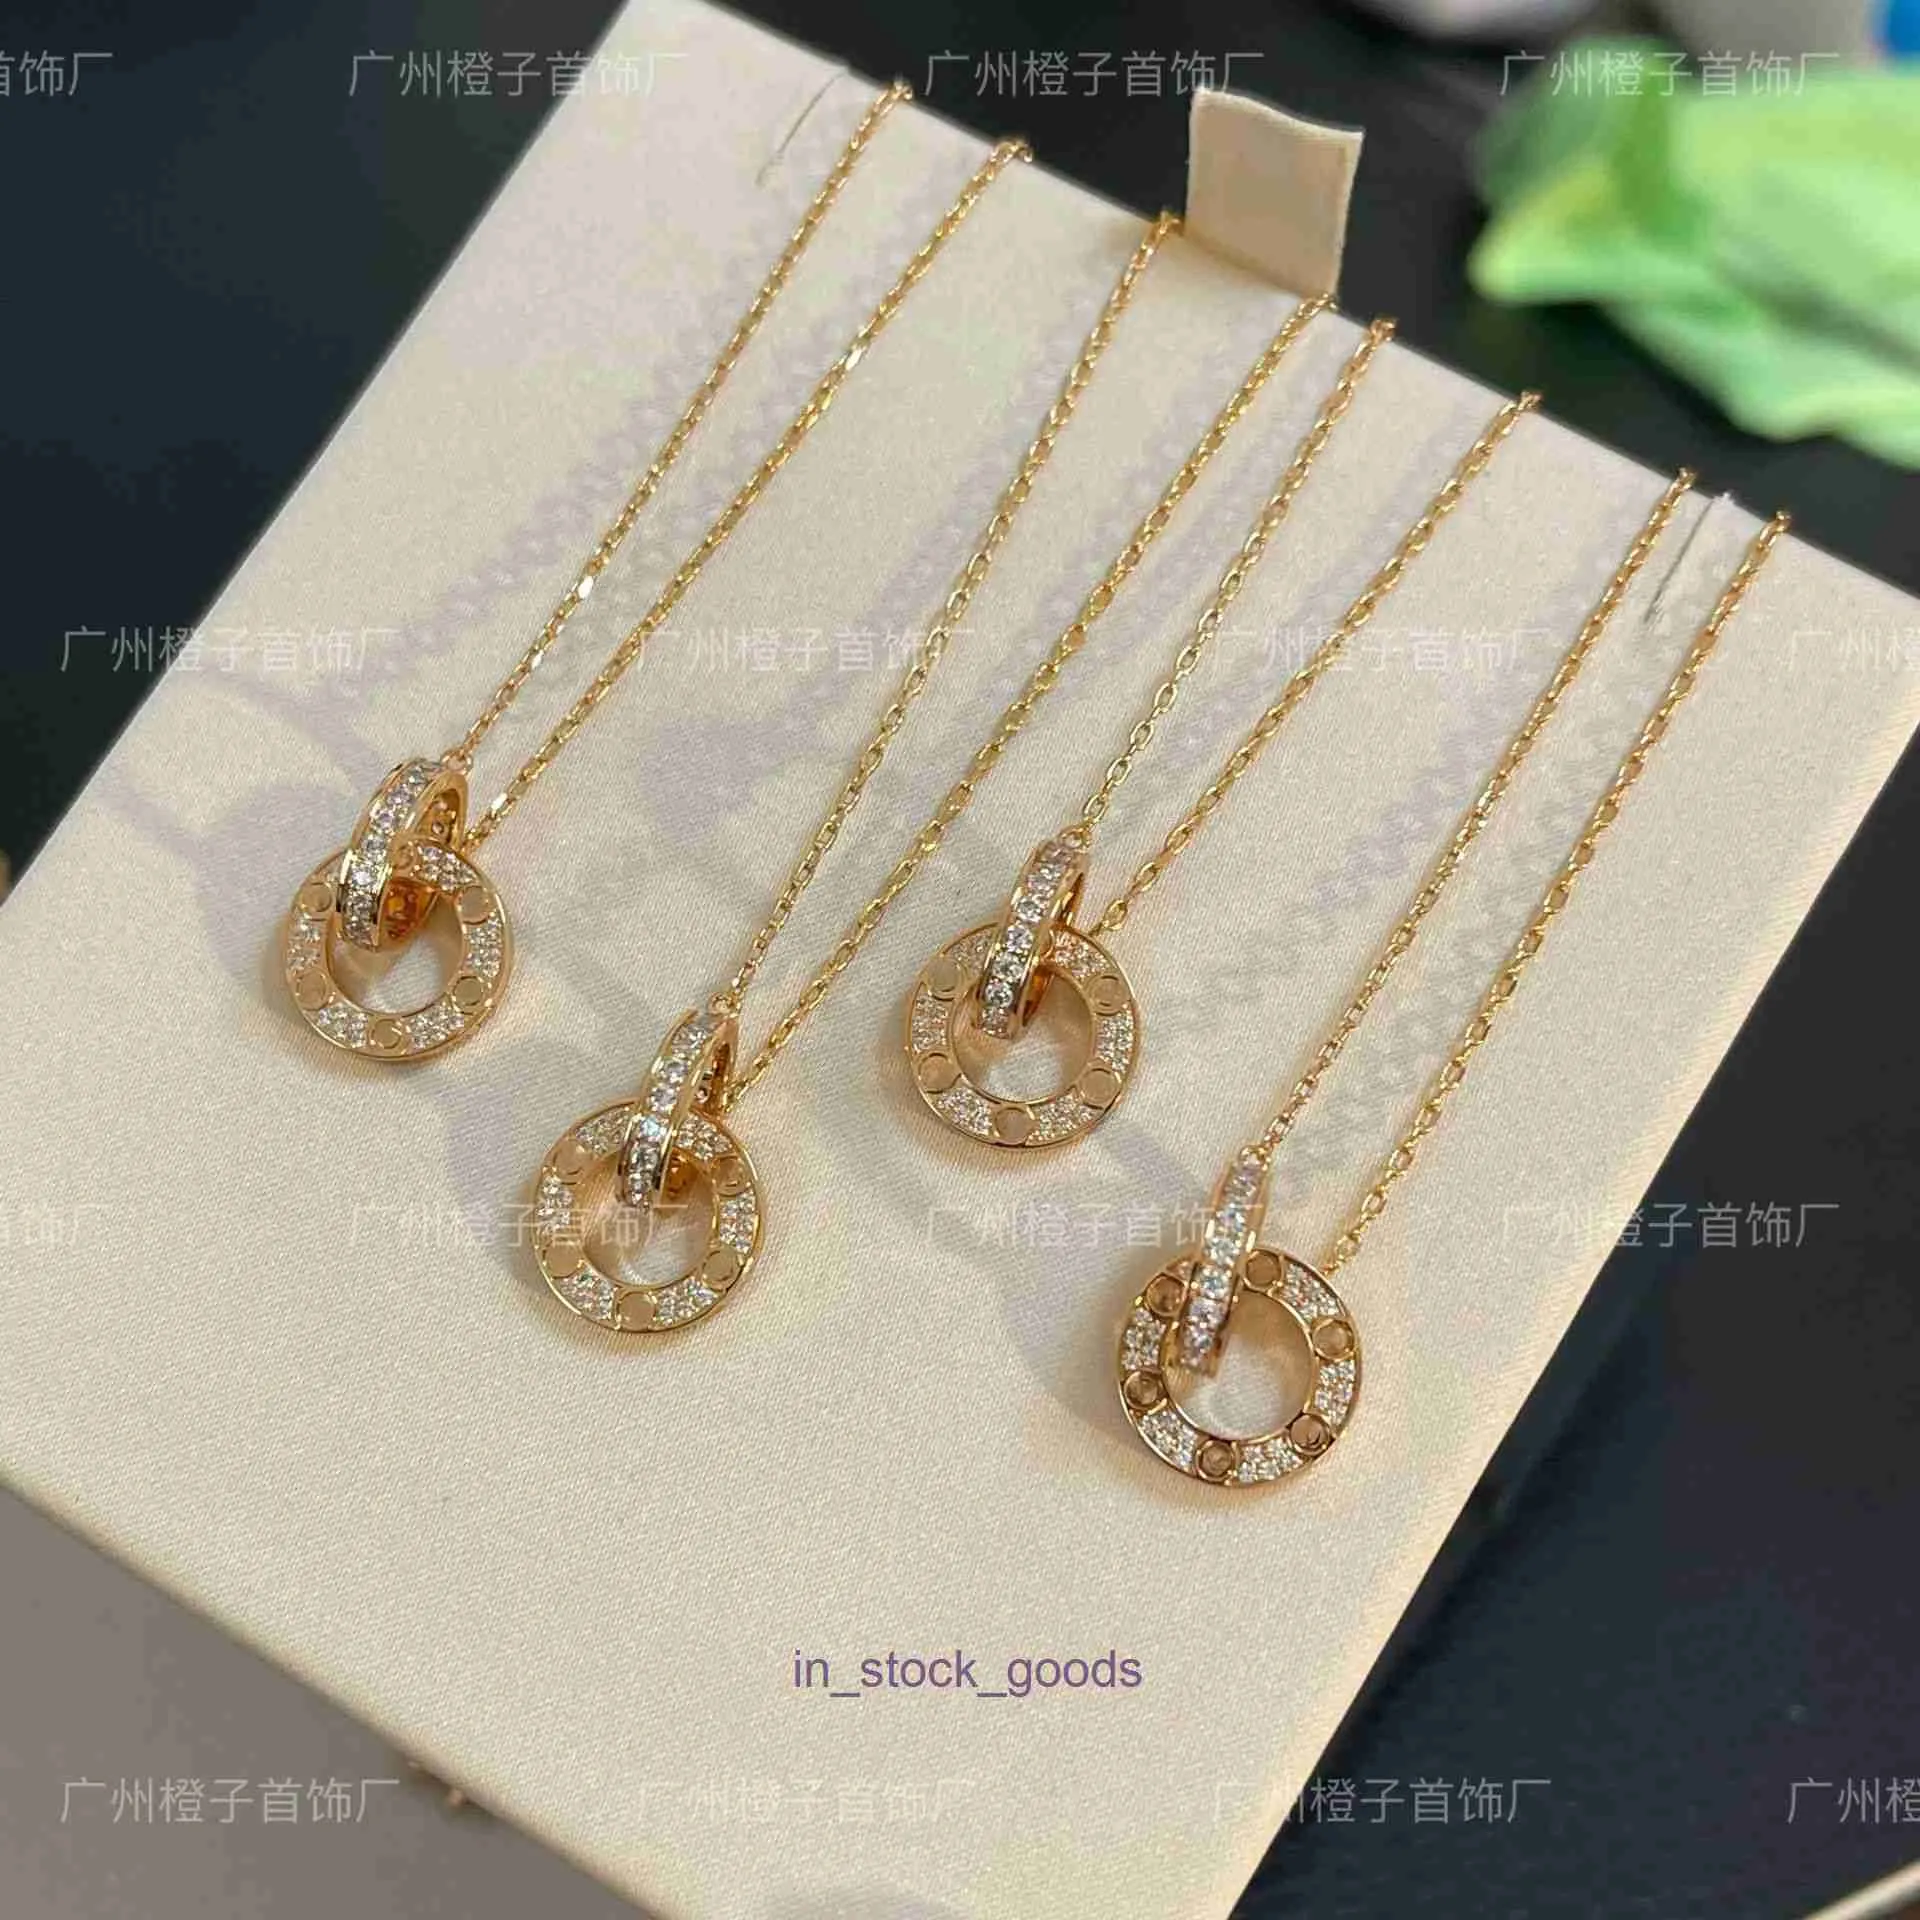 Top luxury fine designer jewelry V Gold Full Sky Star Womens Full Diamond Double Button Pendant Rose Gold Fashion Simple and Versatile Original 1to1 With Real Logo